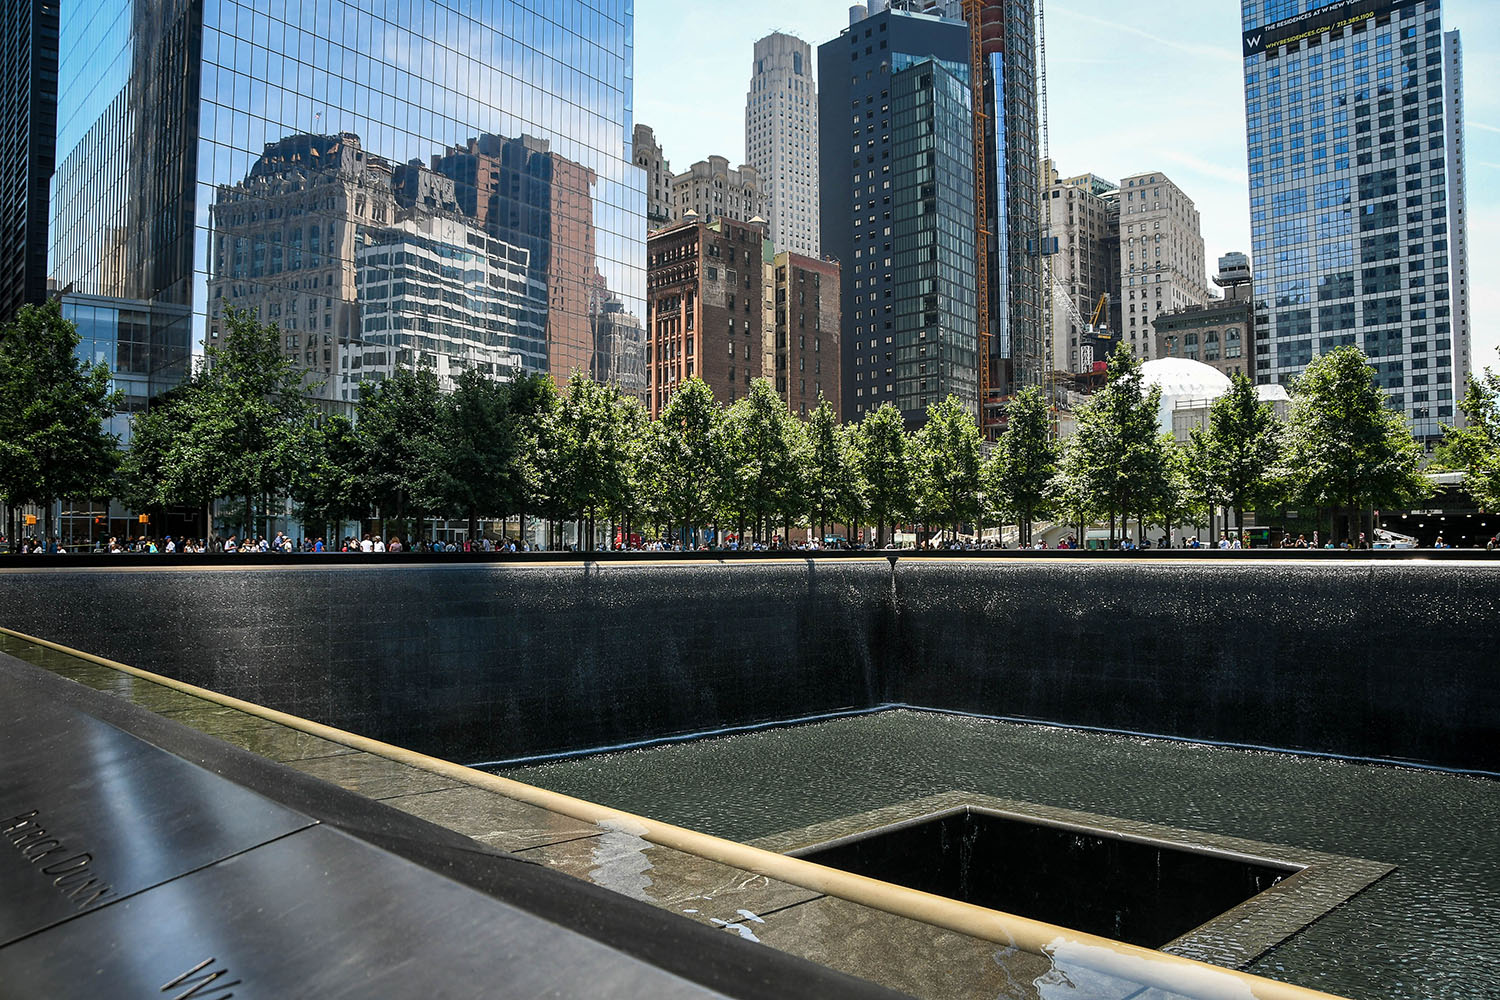 Things to Do in New York City 9/11 Memorial and Museum